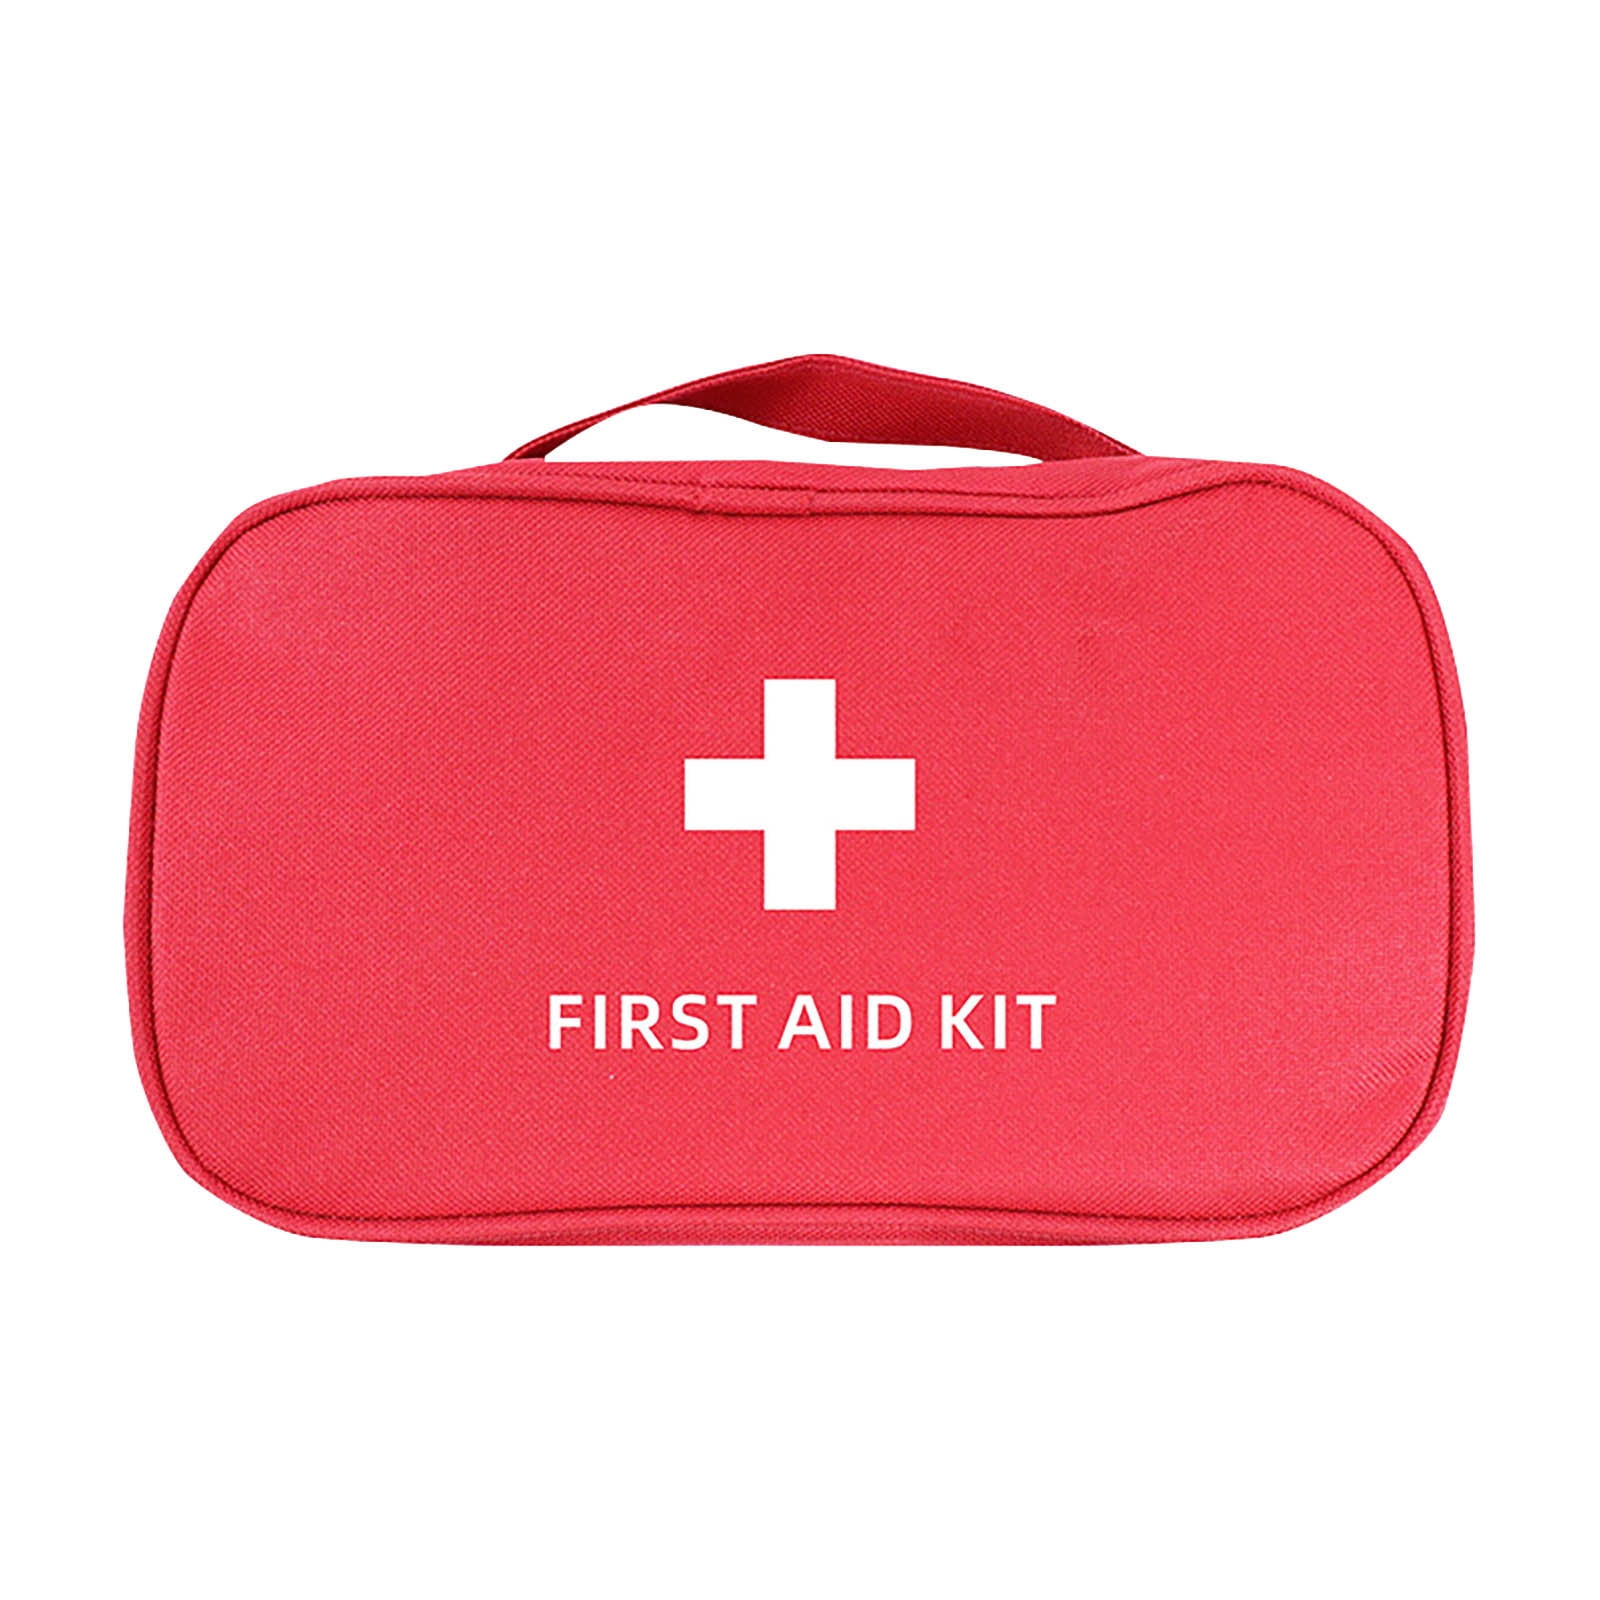 Whatyiu First Aid Kit,12 Pieces Outdoor First Aid Treatment Bag Travel Home Office Car Emergency Medical Kit for Small First Aid Kit for Camping,Hiking,Backpacking,Travel,Vehicle,Outdoors 